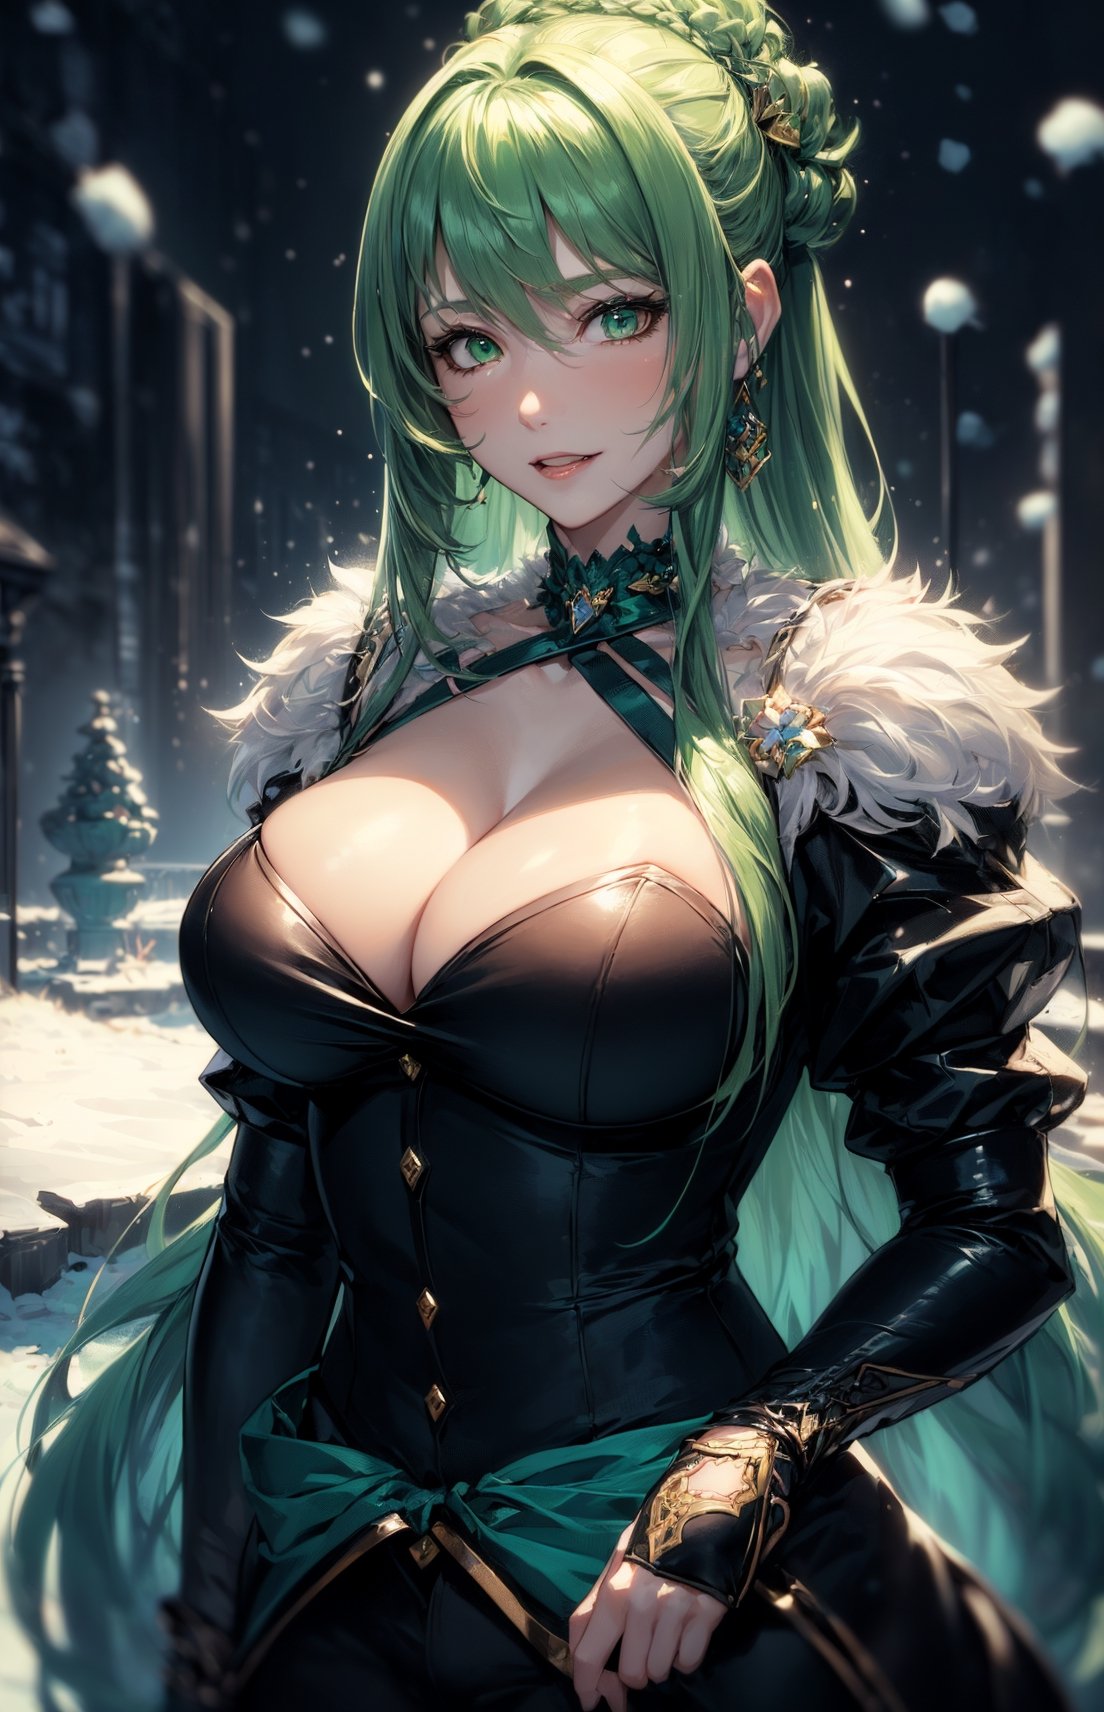 (((fantasy setting, fantasy snow garden background:1.3))), (((long green-hair:1.3))), (longhairstyle:1.4), ((pale_skin)), ((green eyes)), ((1 mature woman)), (busty), large breasts, best quality, extremely detailed, HD, 8k, (happy face), (happy eyes),dress,1 girl